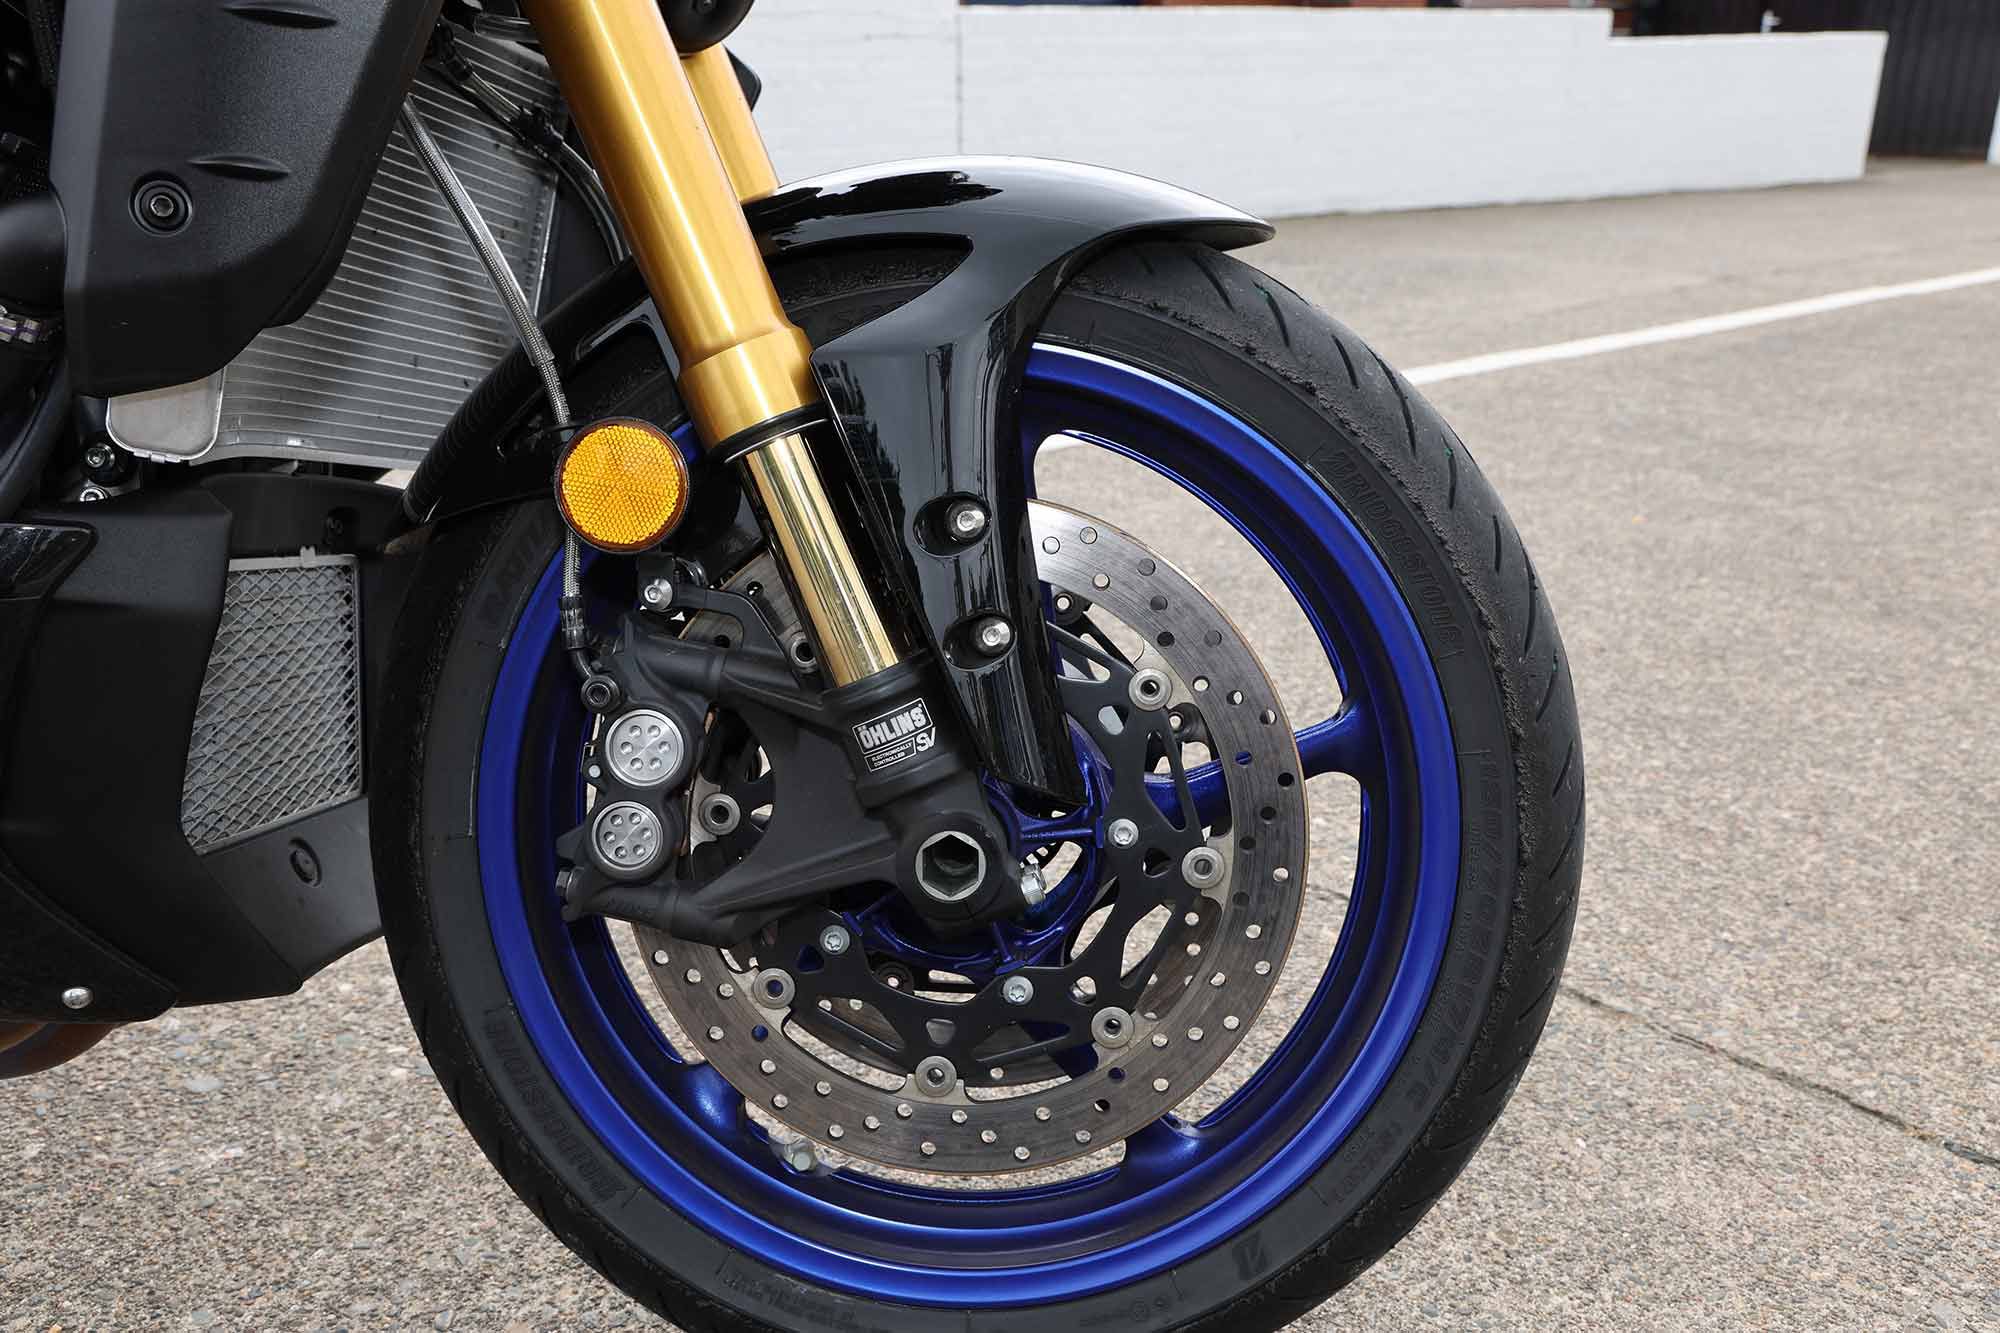 Yamaha introduced the SP version, equipped with the very latest next-generation Öhlins electronically controlled suspension.